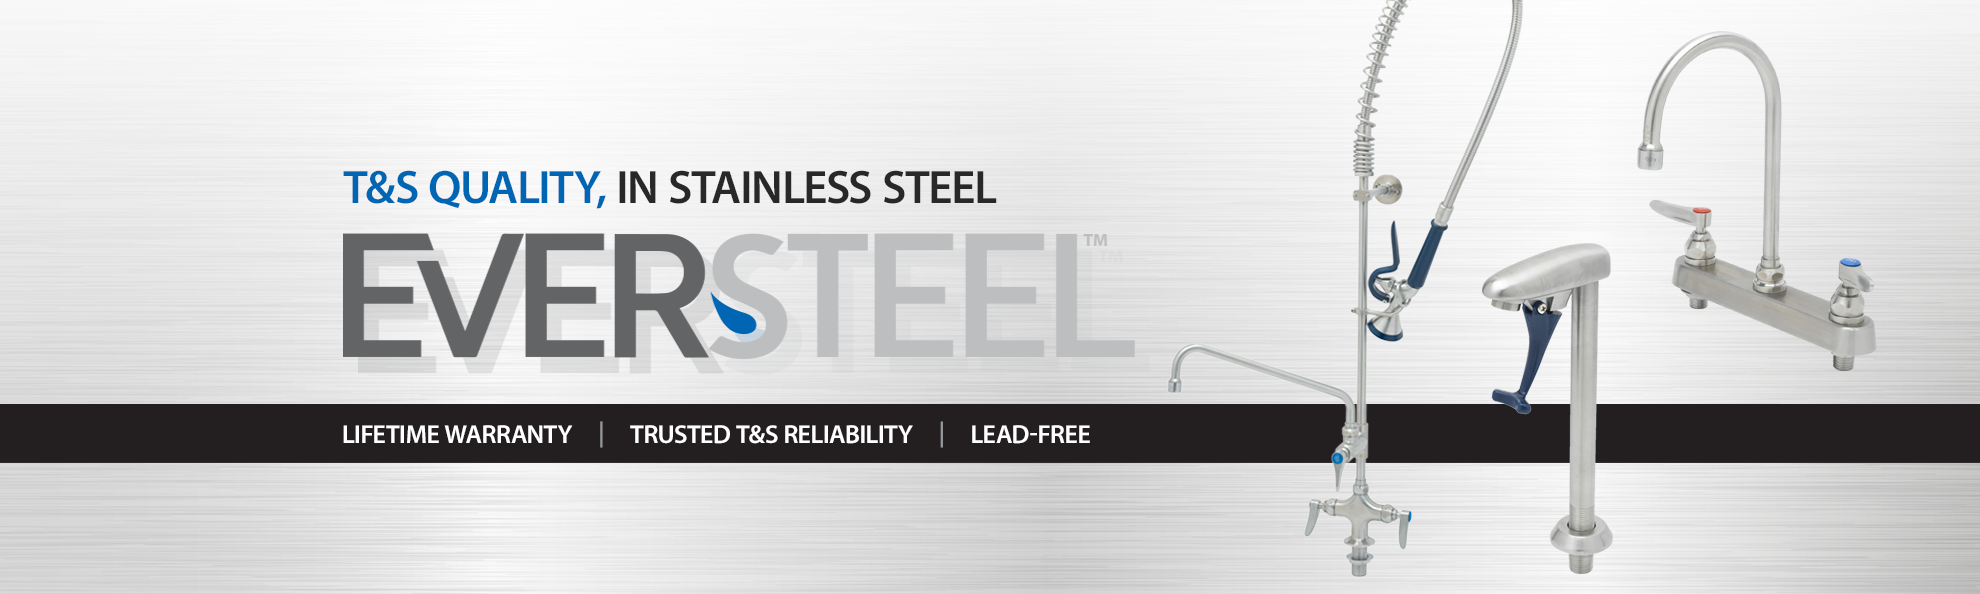 EverSteel - T&S Quality In Stainless Steel